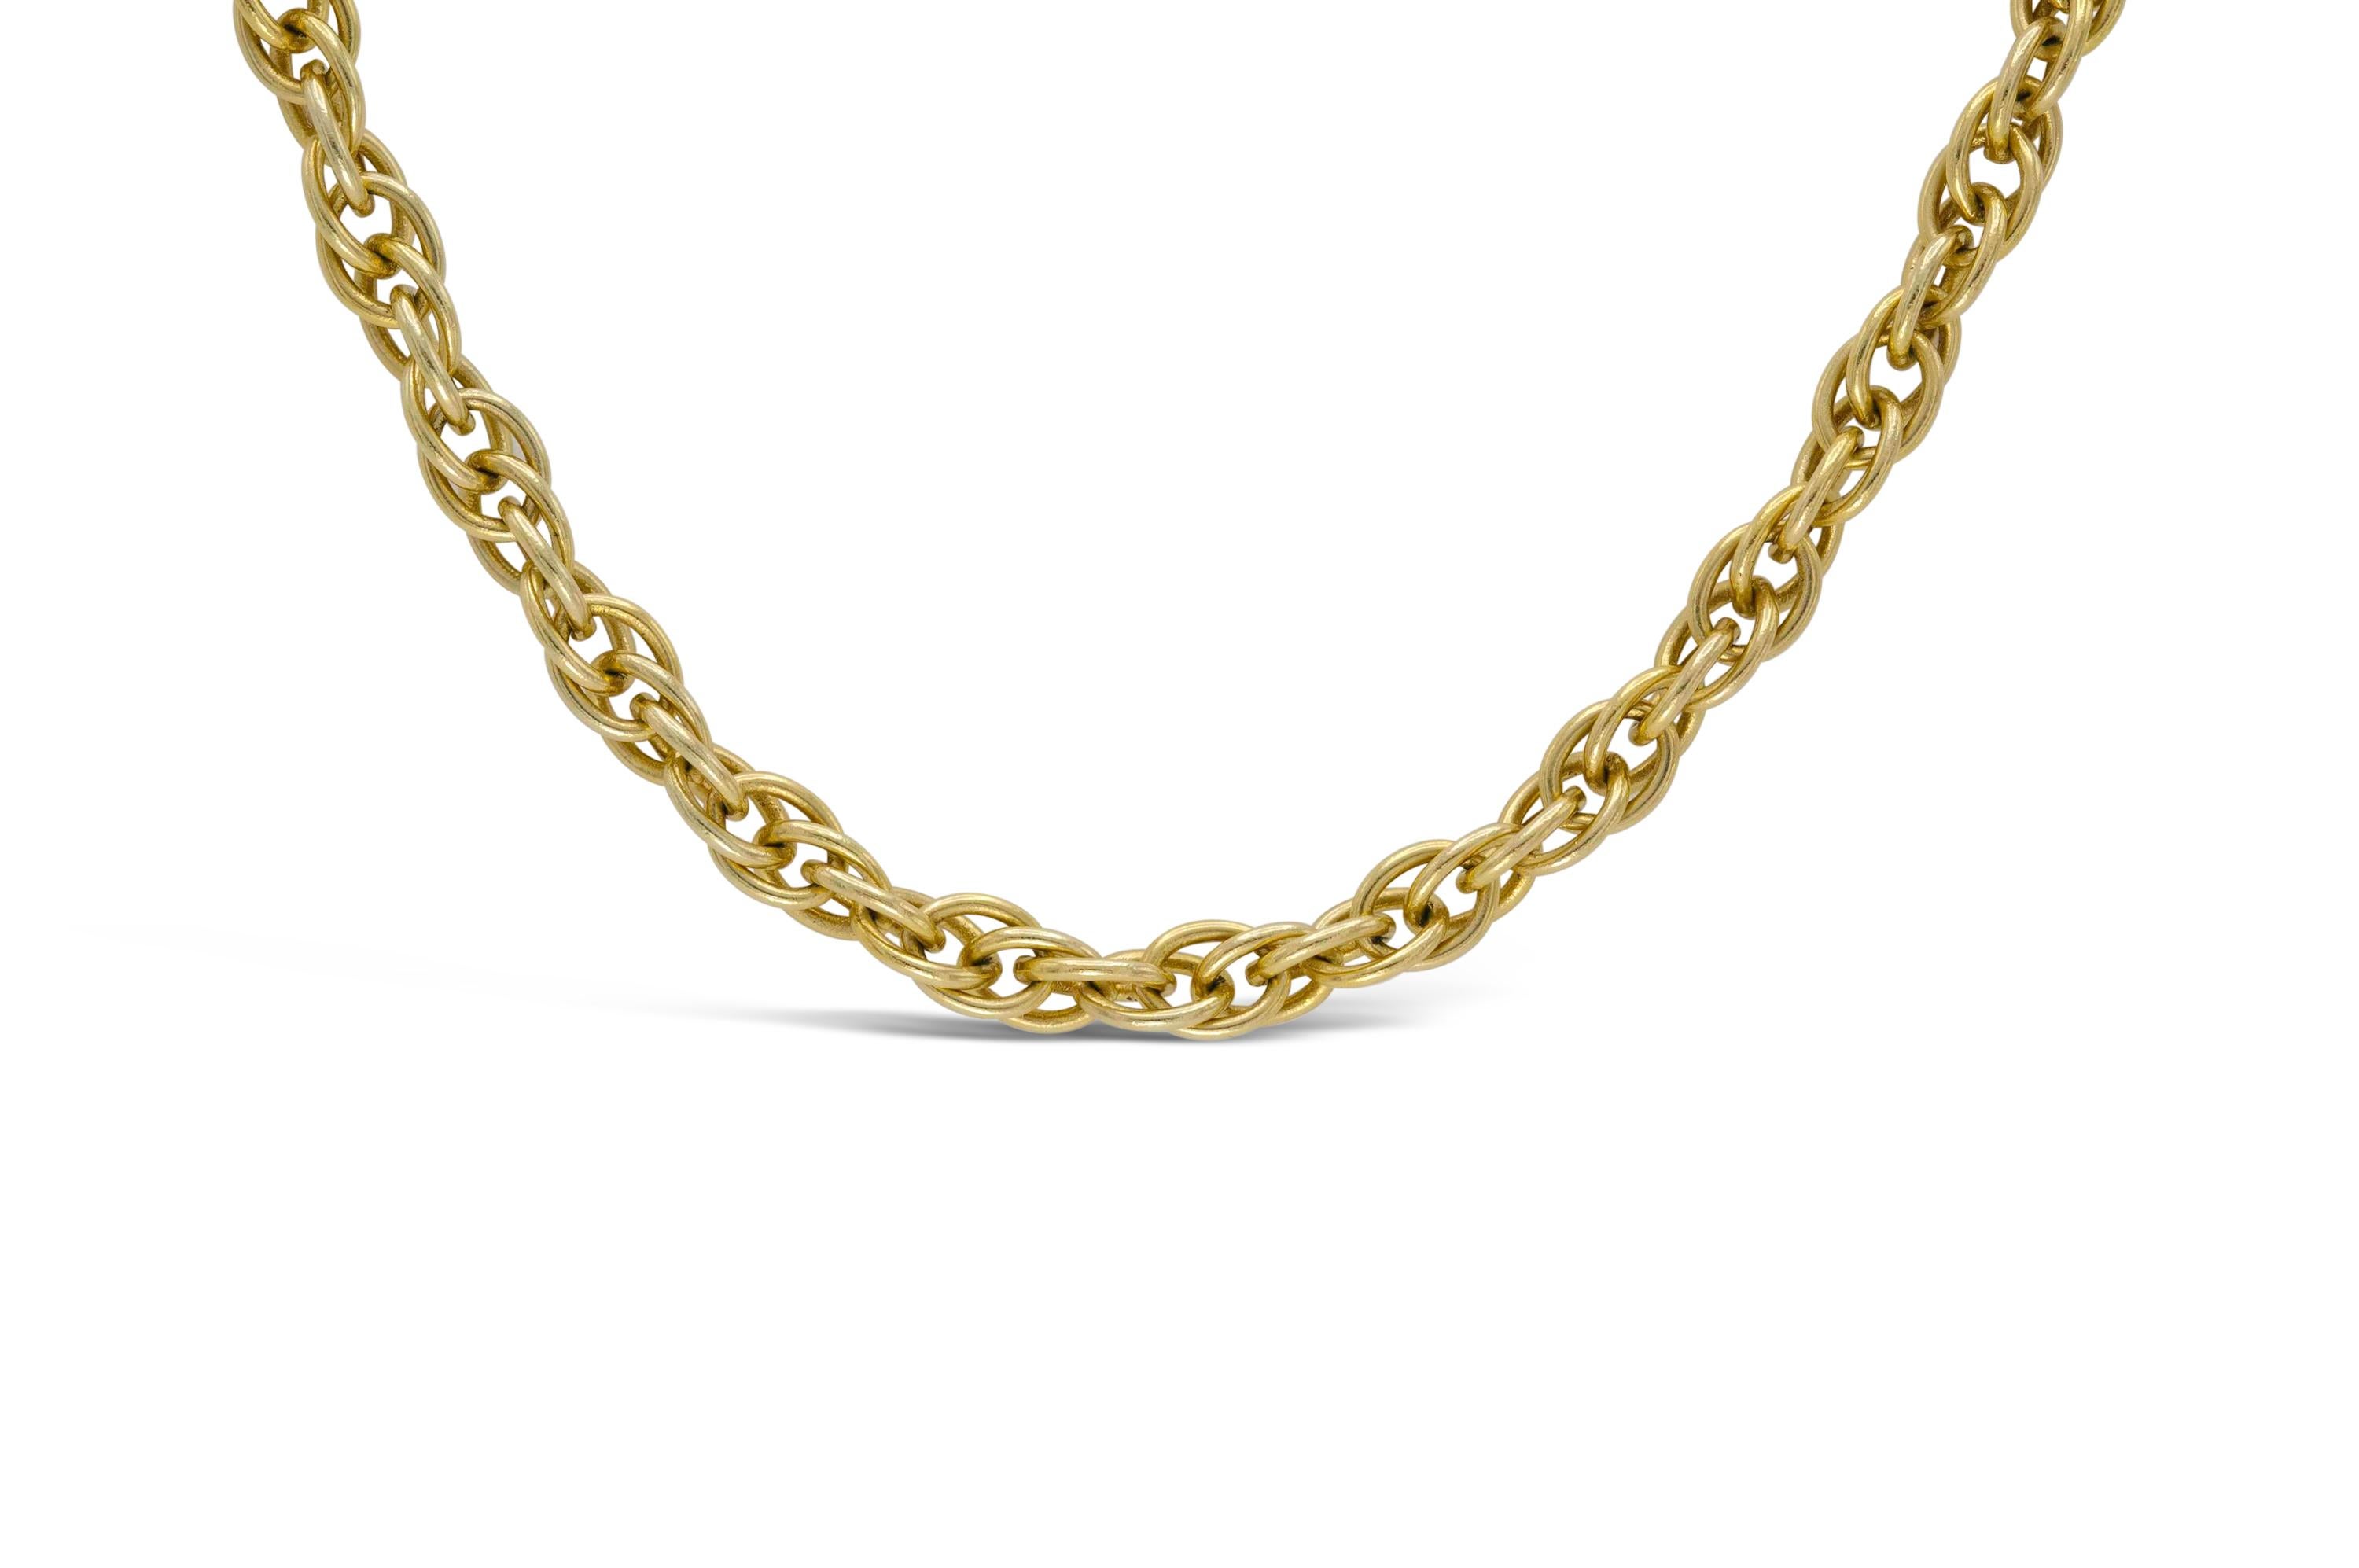 Finely crafted in 14k yellow gold.
30 inches long